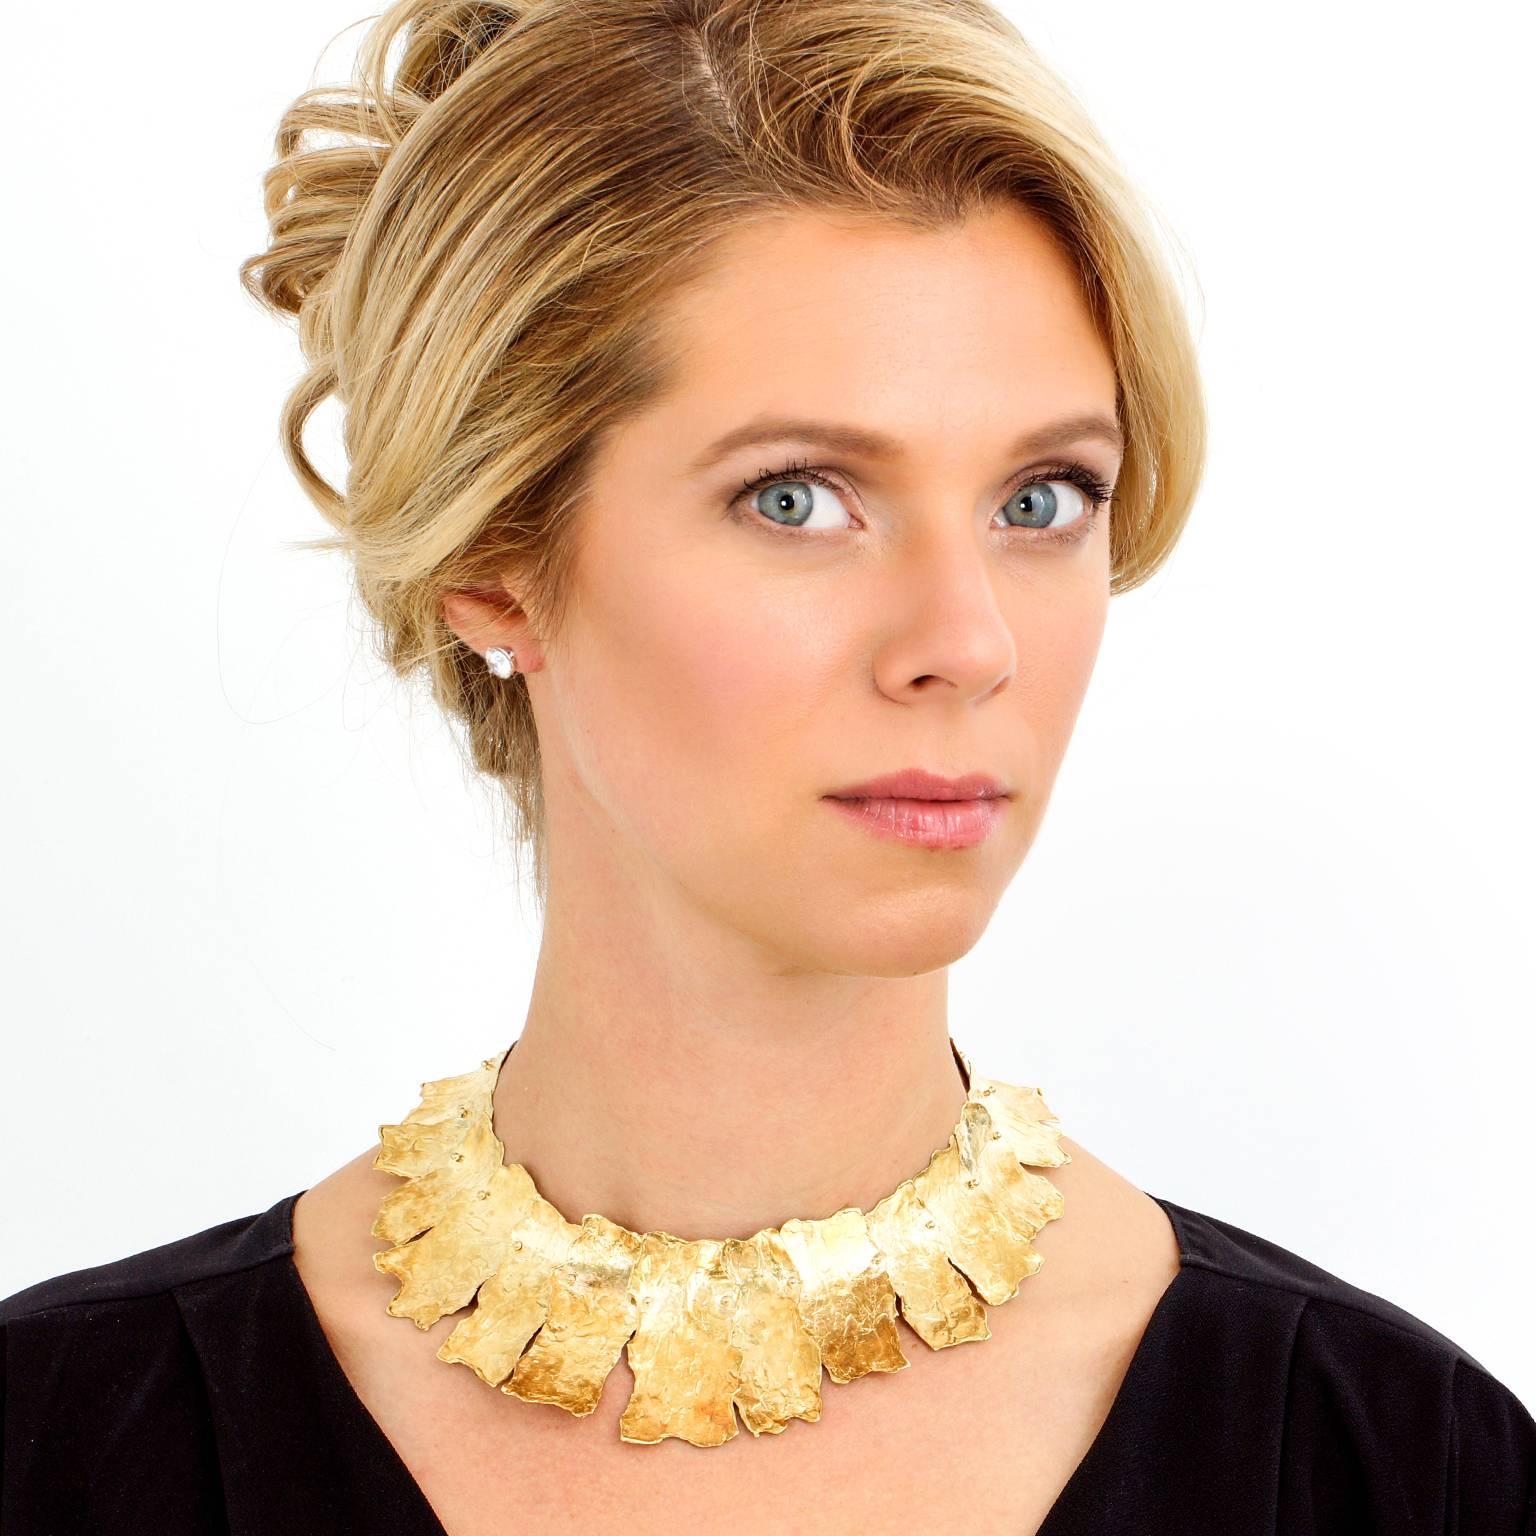 Circa 1970s, 18k, Ed Wiener, New York City.  Exquisitely made by modernist master goldsmith and visionary, Ed Wiener, this gorgeous statement necklace features contoured, overlapping reticulated eighteen-karat gold plates. Impeccably stunning in